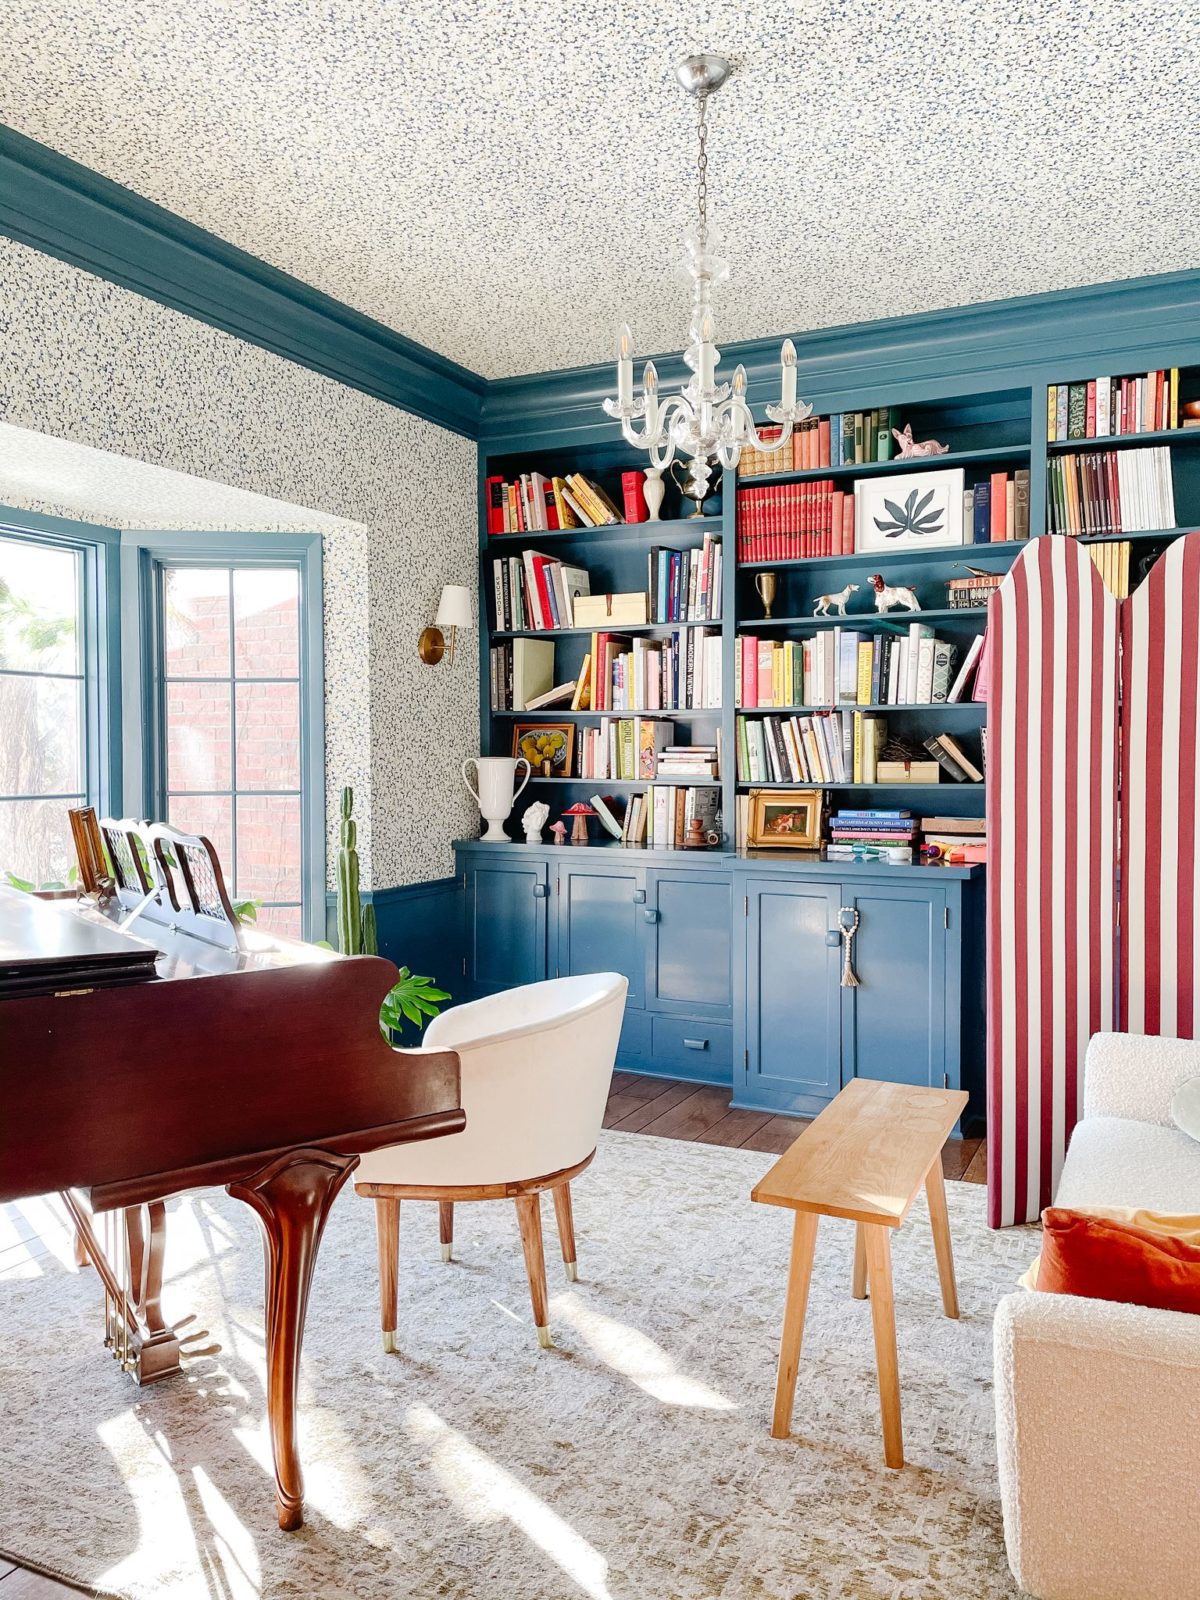 5 Rooms in Our House That Look Like Film Sets | Wit & Delight